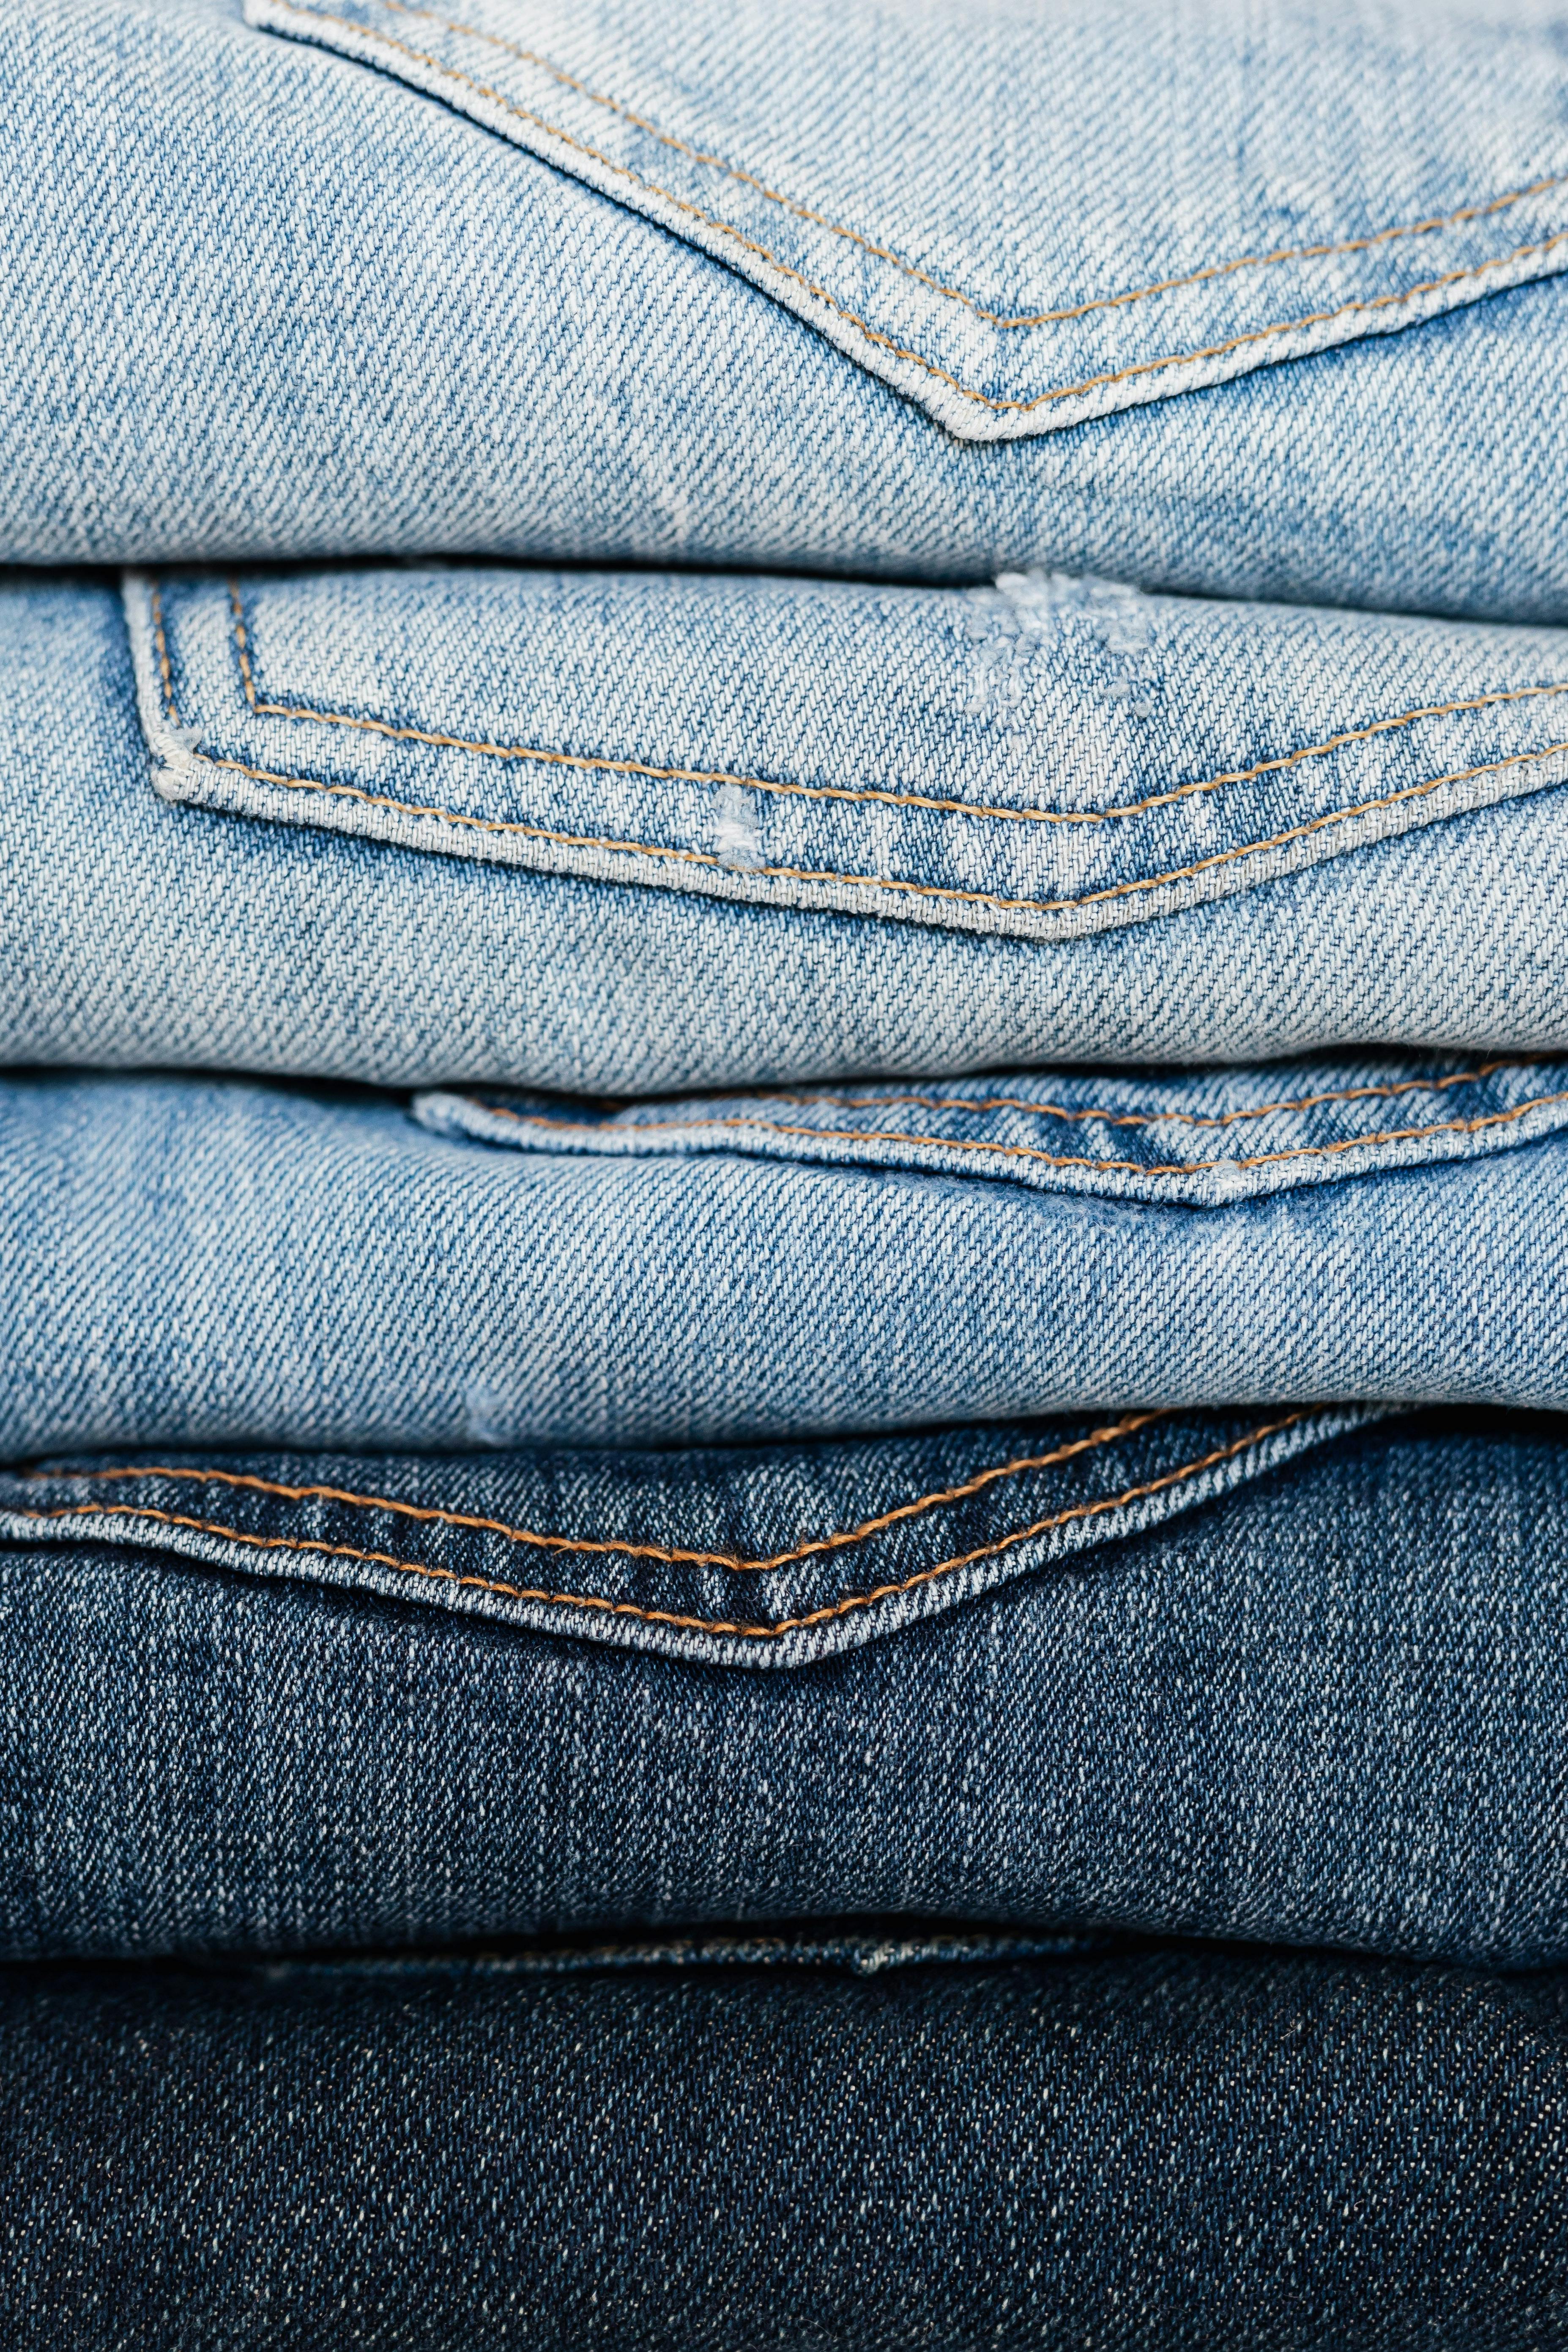 Why Are Jeans Blue? | Mental Floss